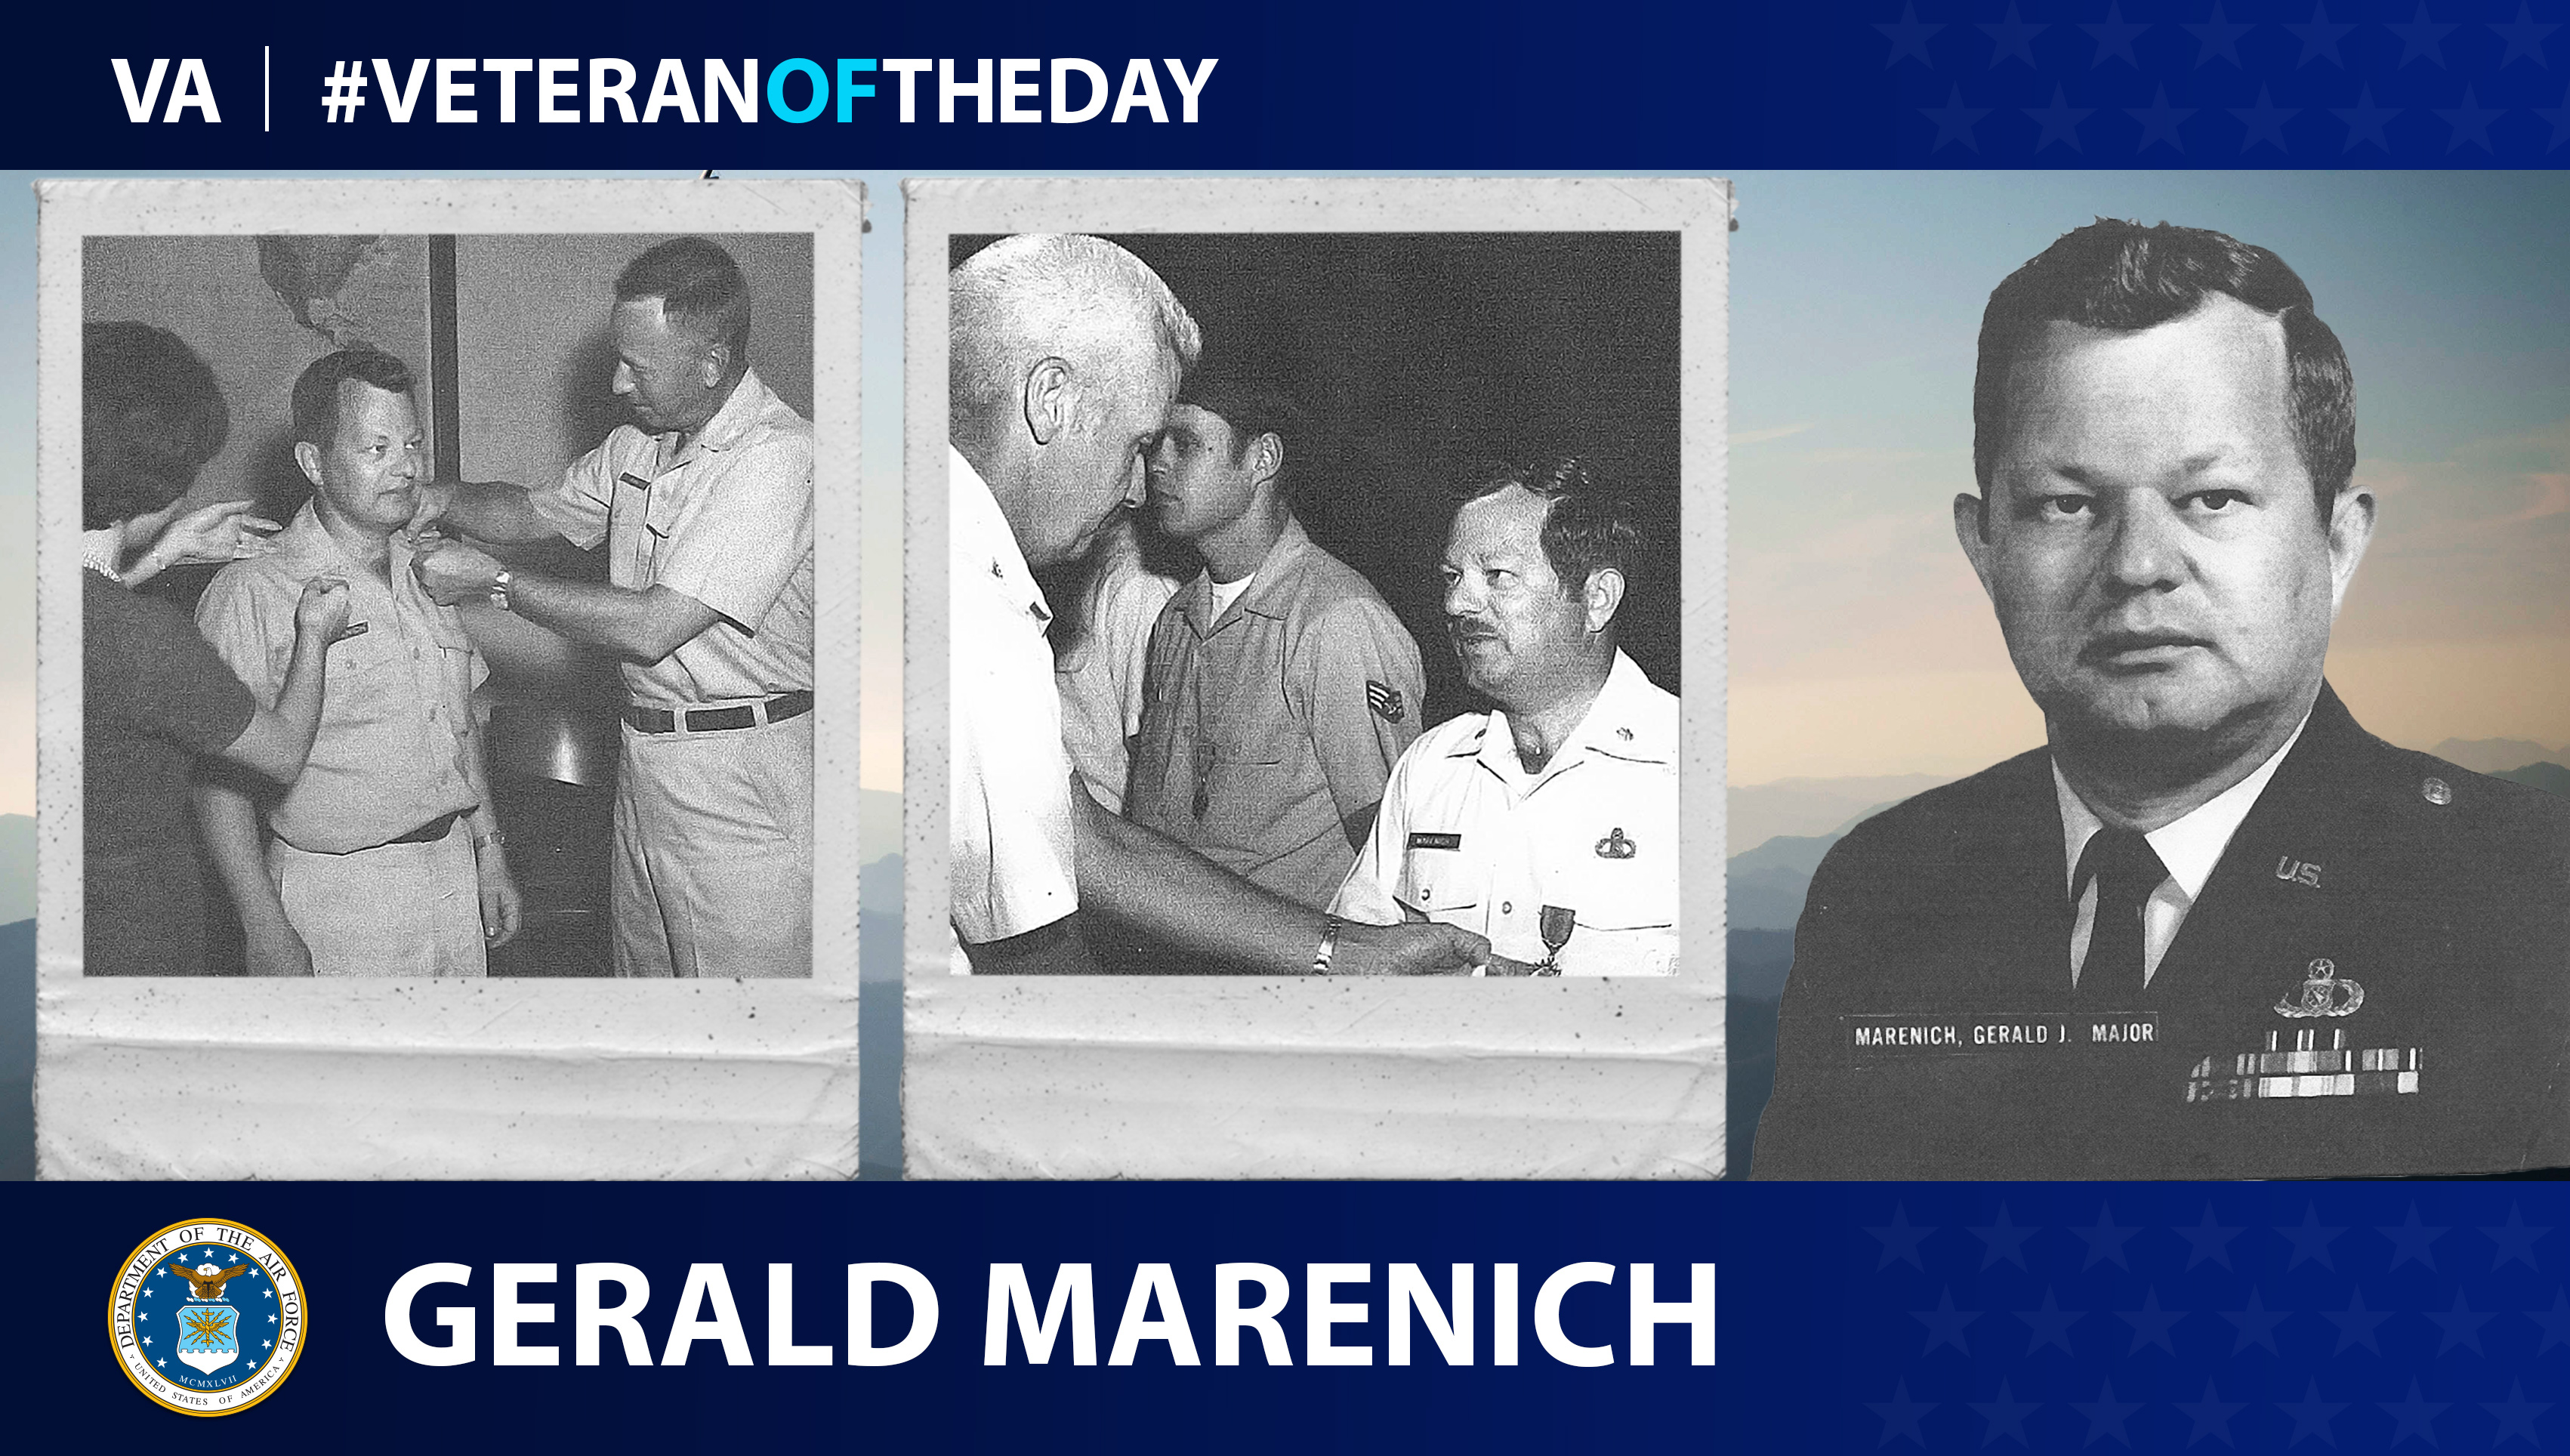 Air Force Veteran Gerald J. Marenich is today's Veteran of the Day.